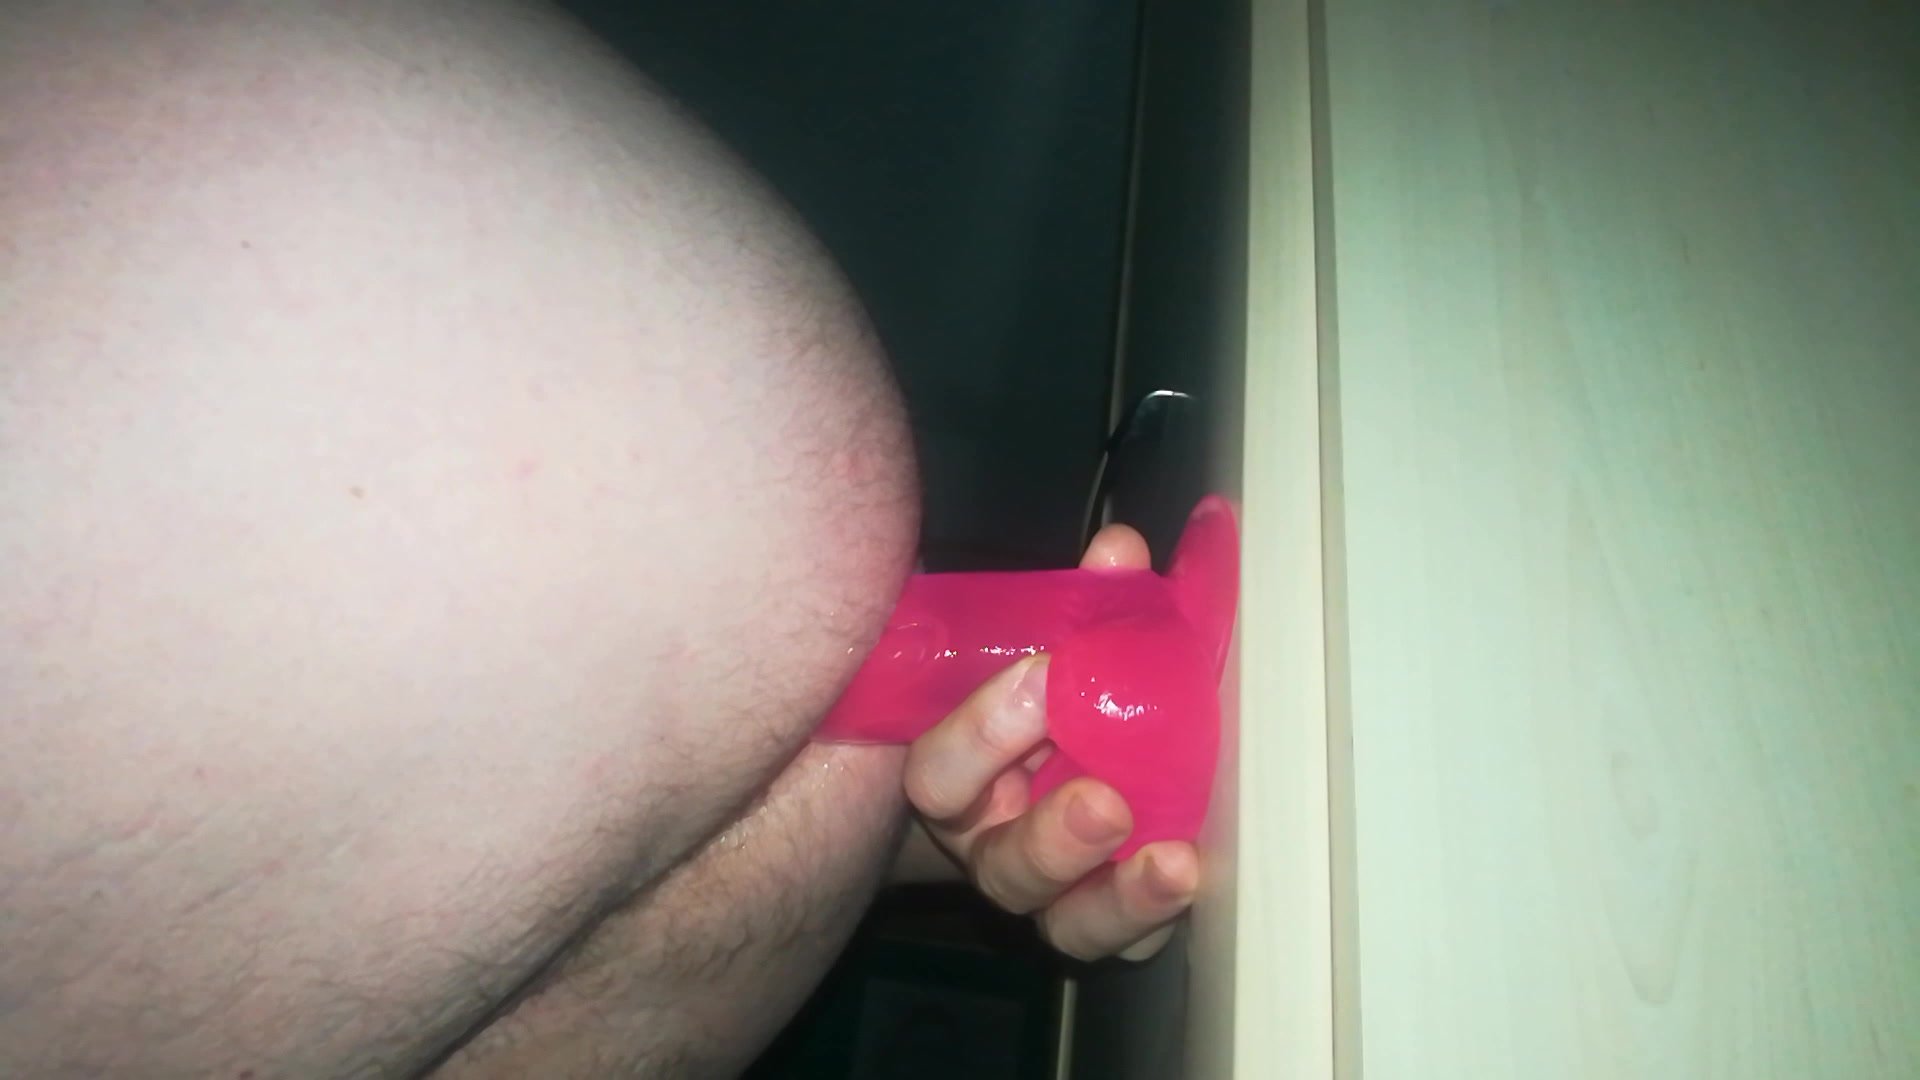 Making my large pink dildo disappear